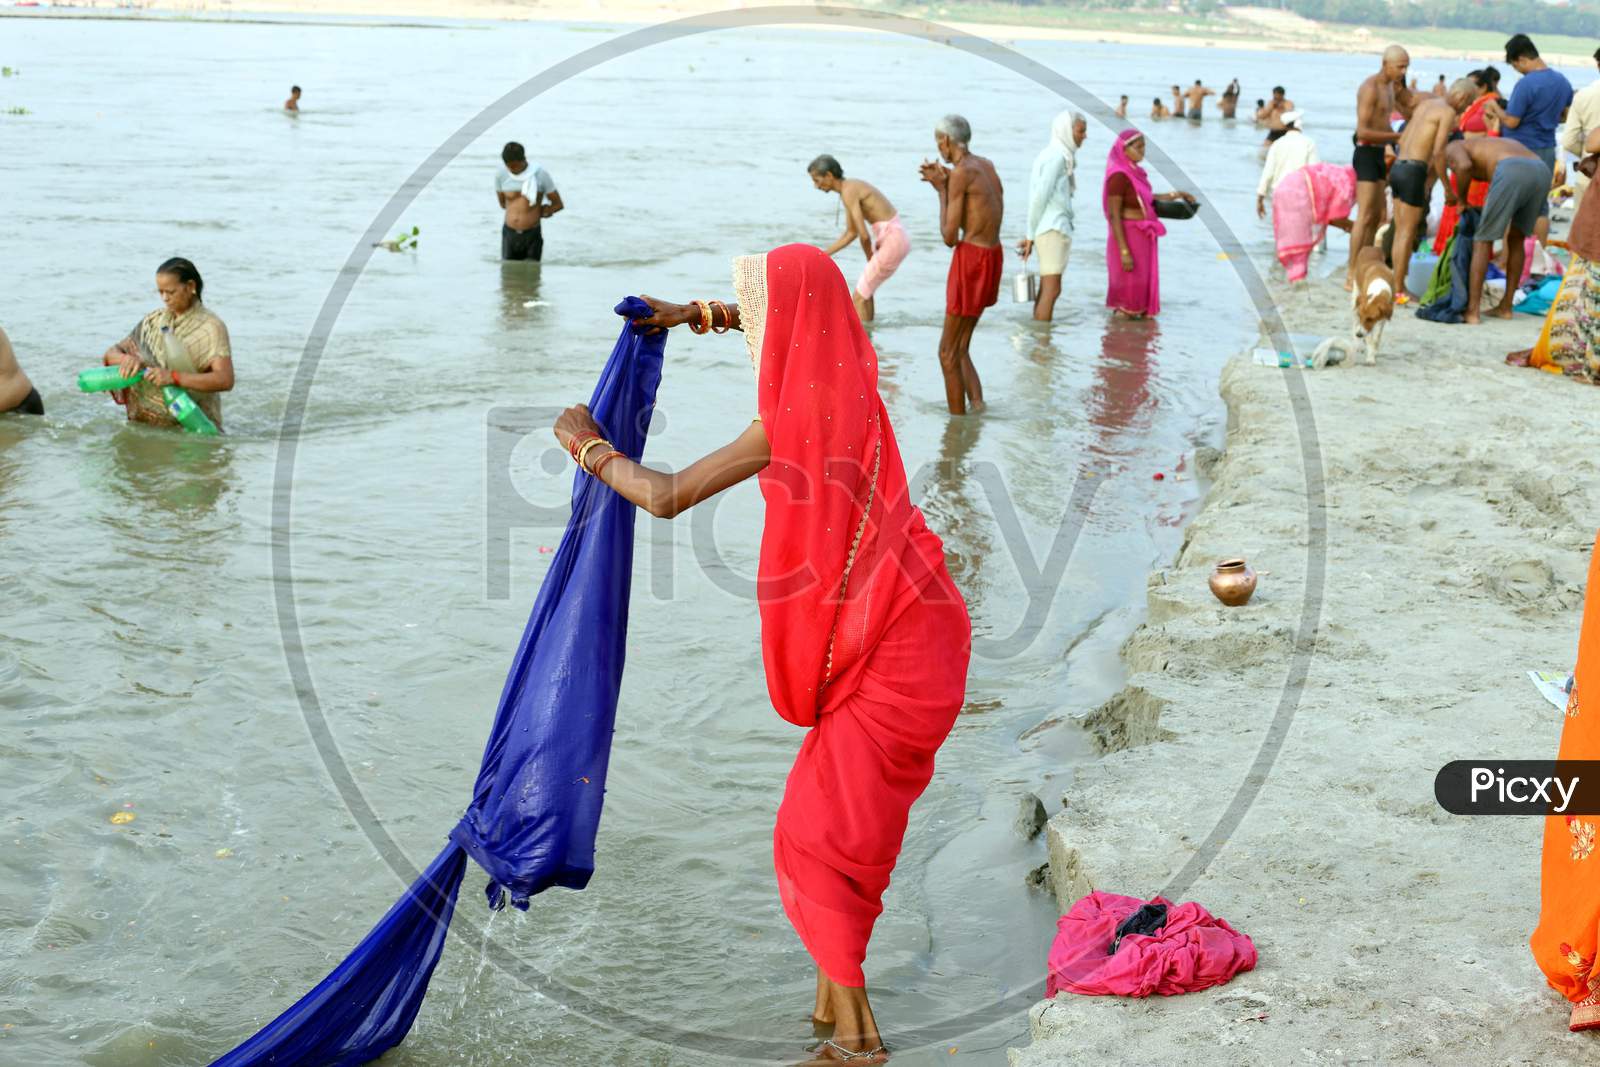 A Woman Wash Her Cloths In The Ganga River After Takes Holy Dip In The Sangam, Confluence Of Three Rivers, The Ganga, The Yamuna And Mythical Saraswati After Lunar Eclipse Or Chandra Grahan In Prayagraj, June 6, 2020.